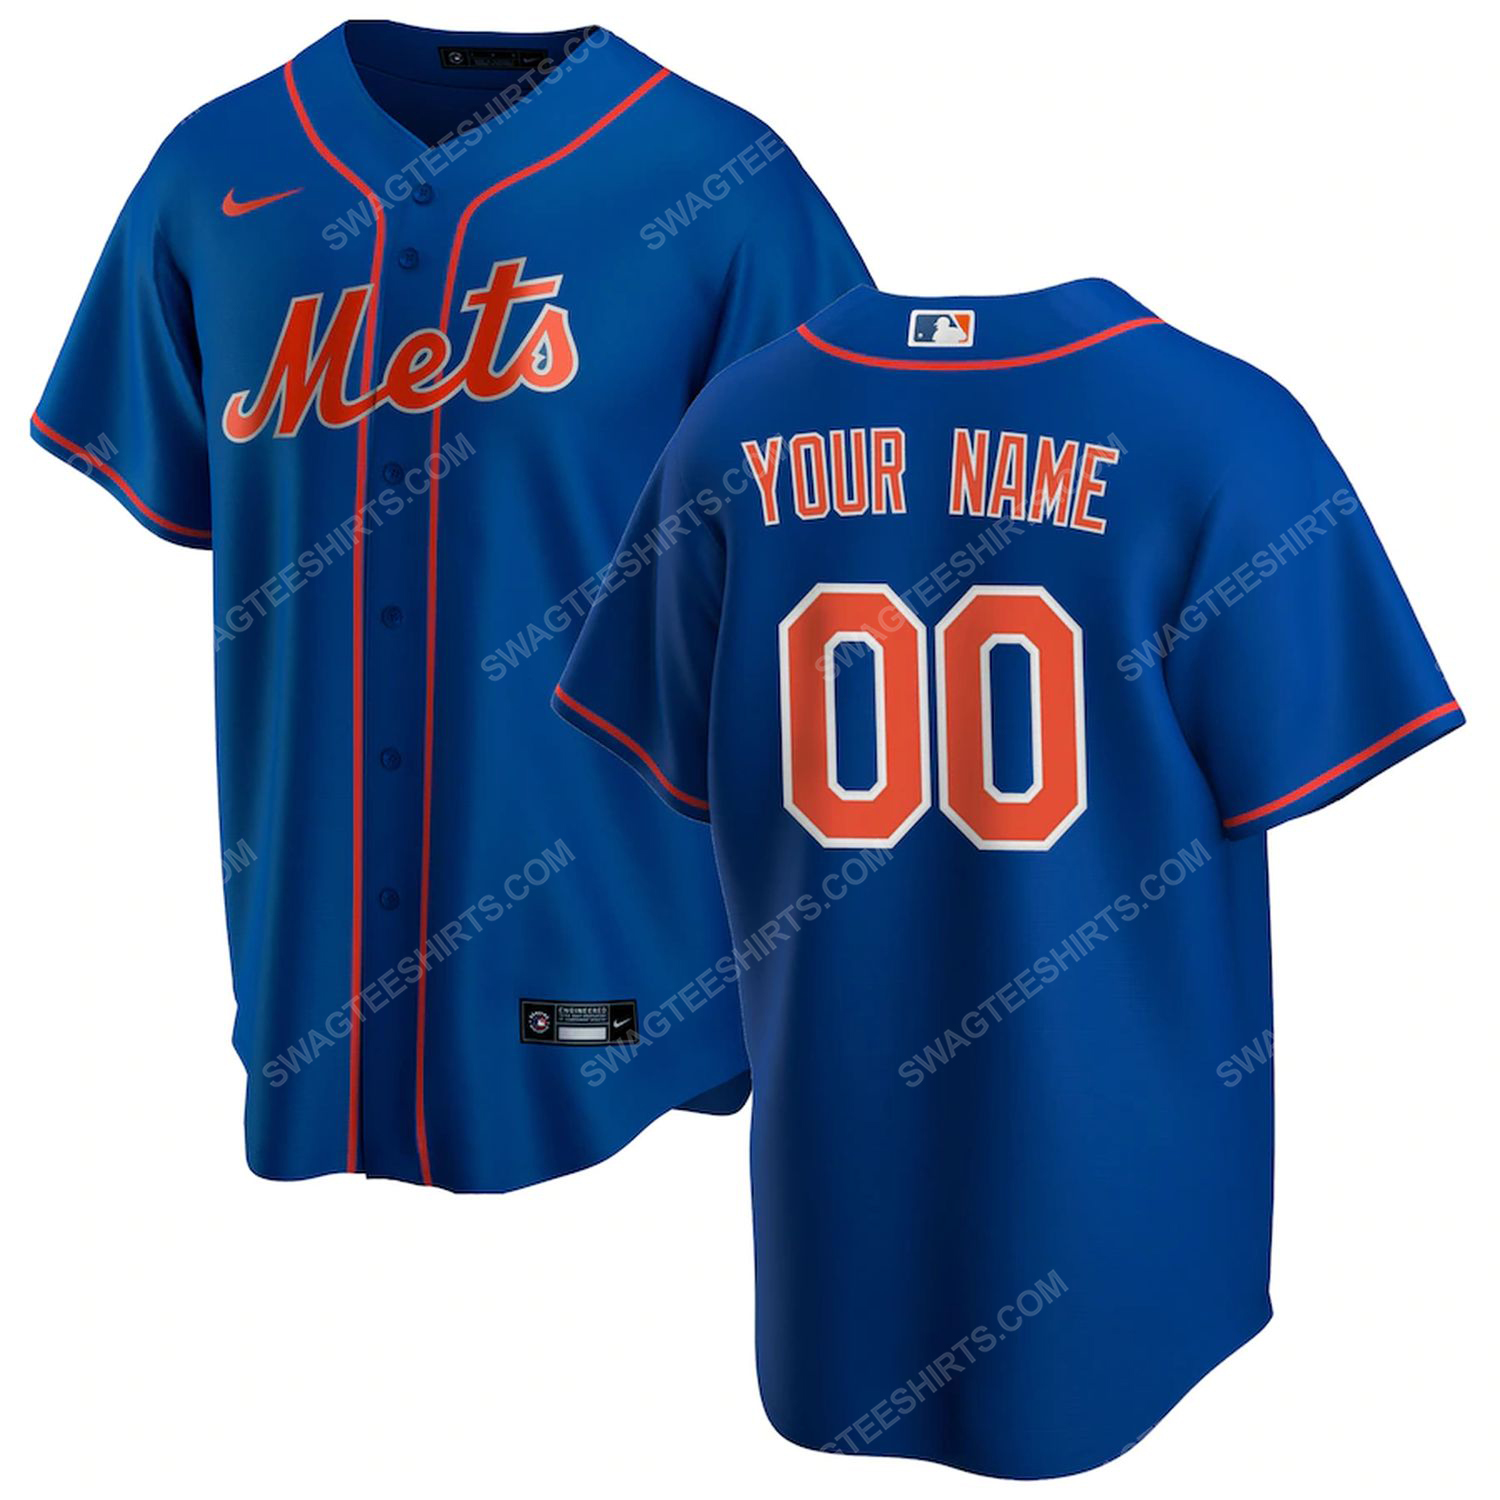 [special edition] Personalized mlb new york mets baseball jersey – maria